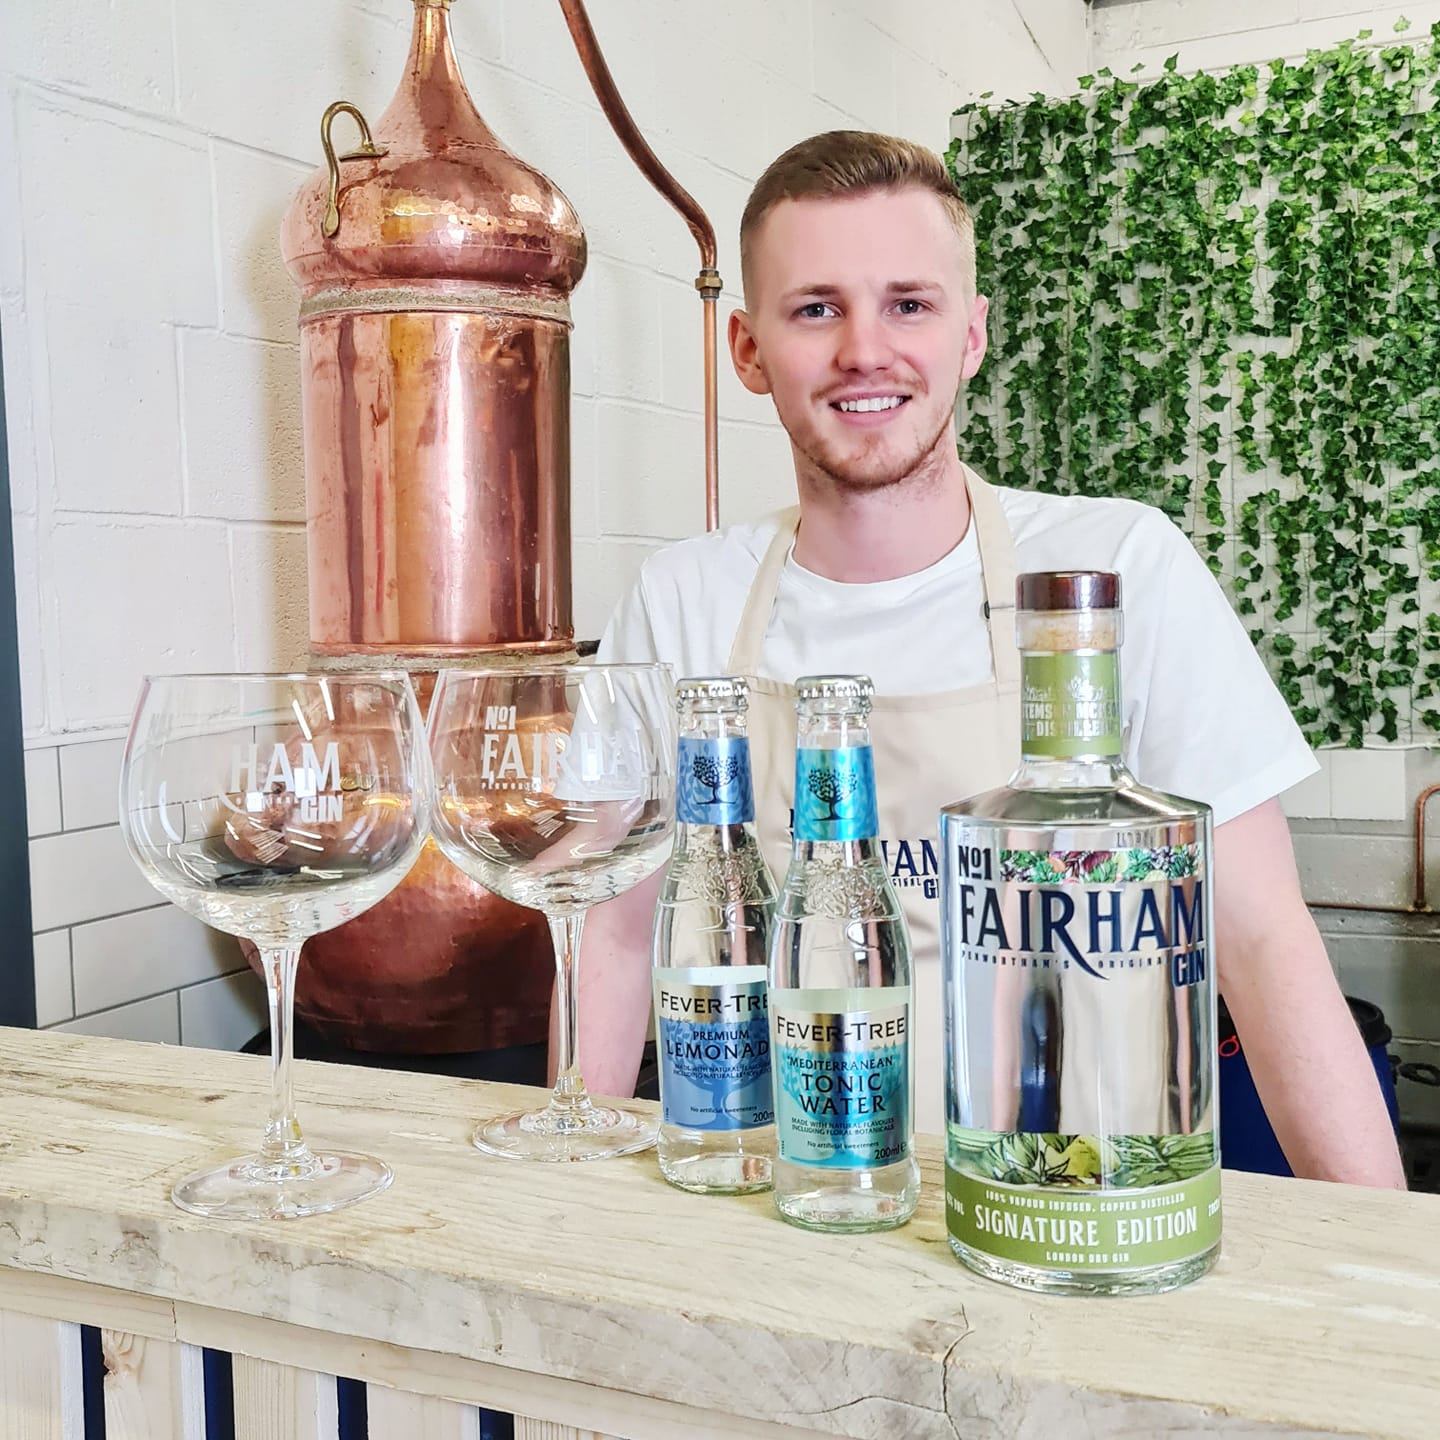 Small distillery in Lancashire producing 100% vapour infused dry gin